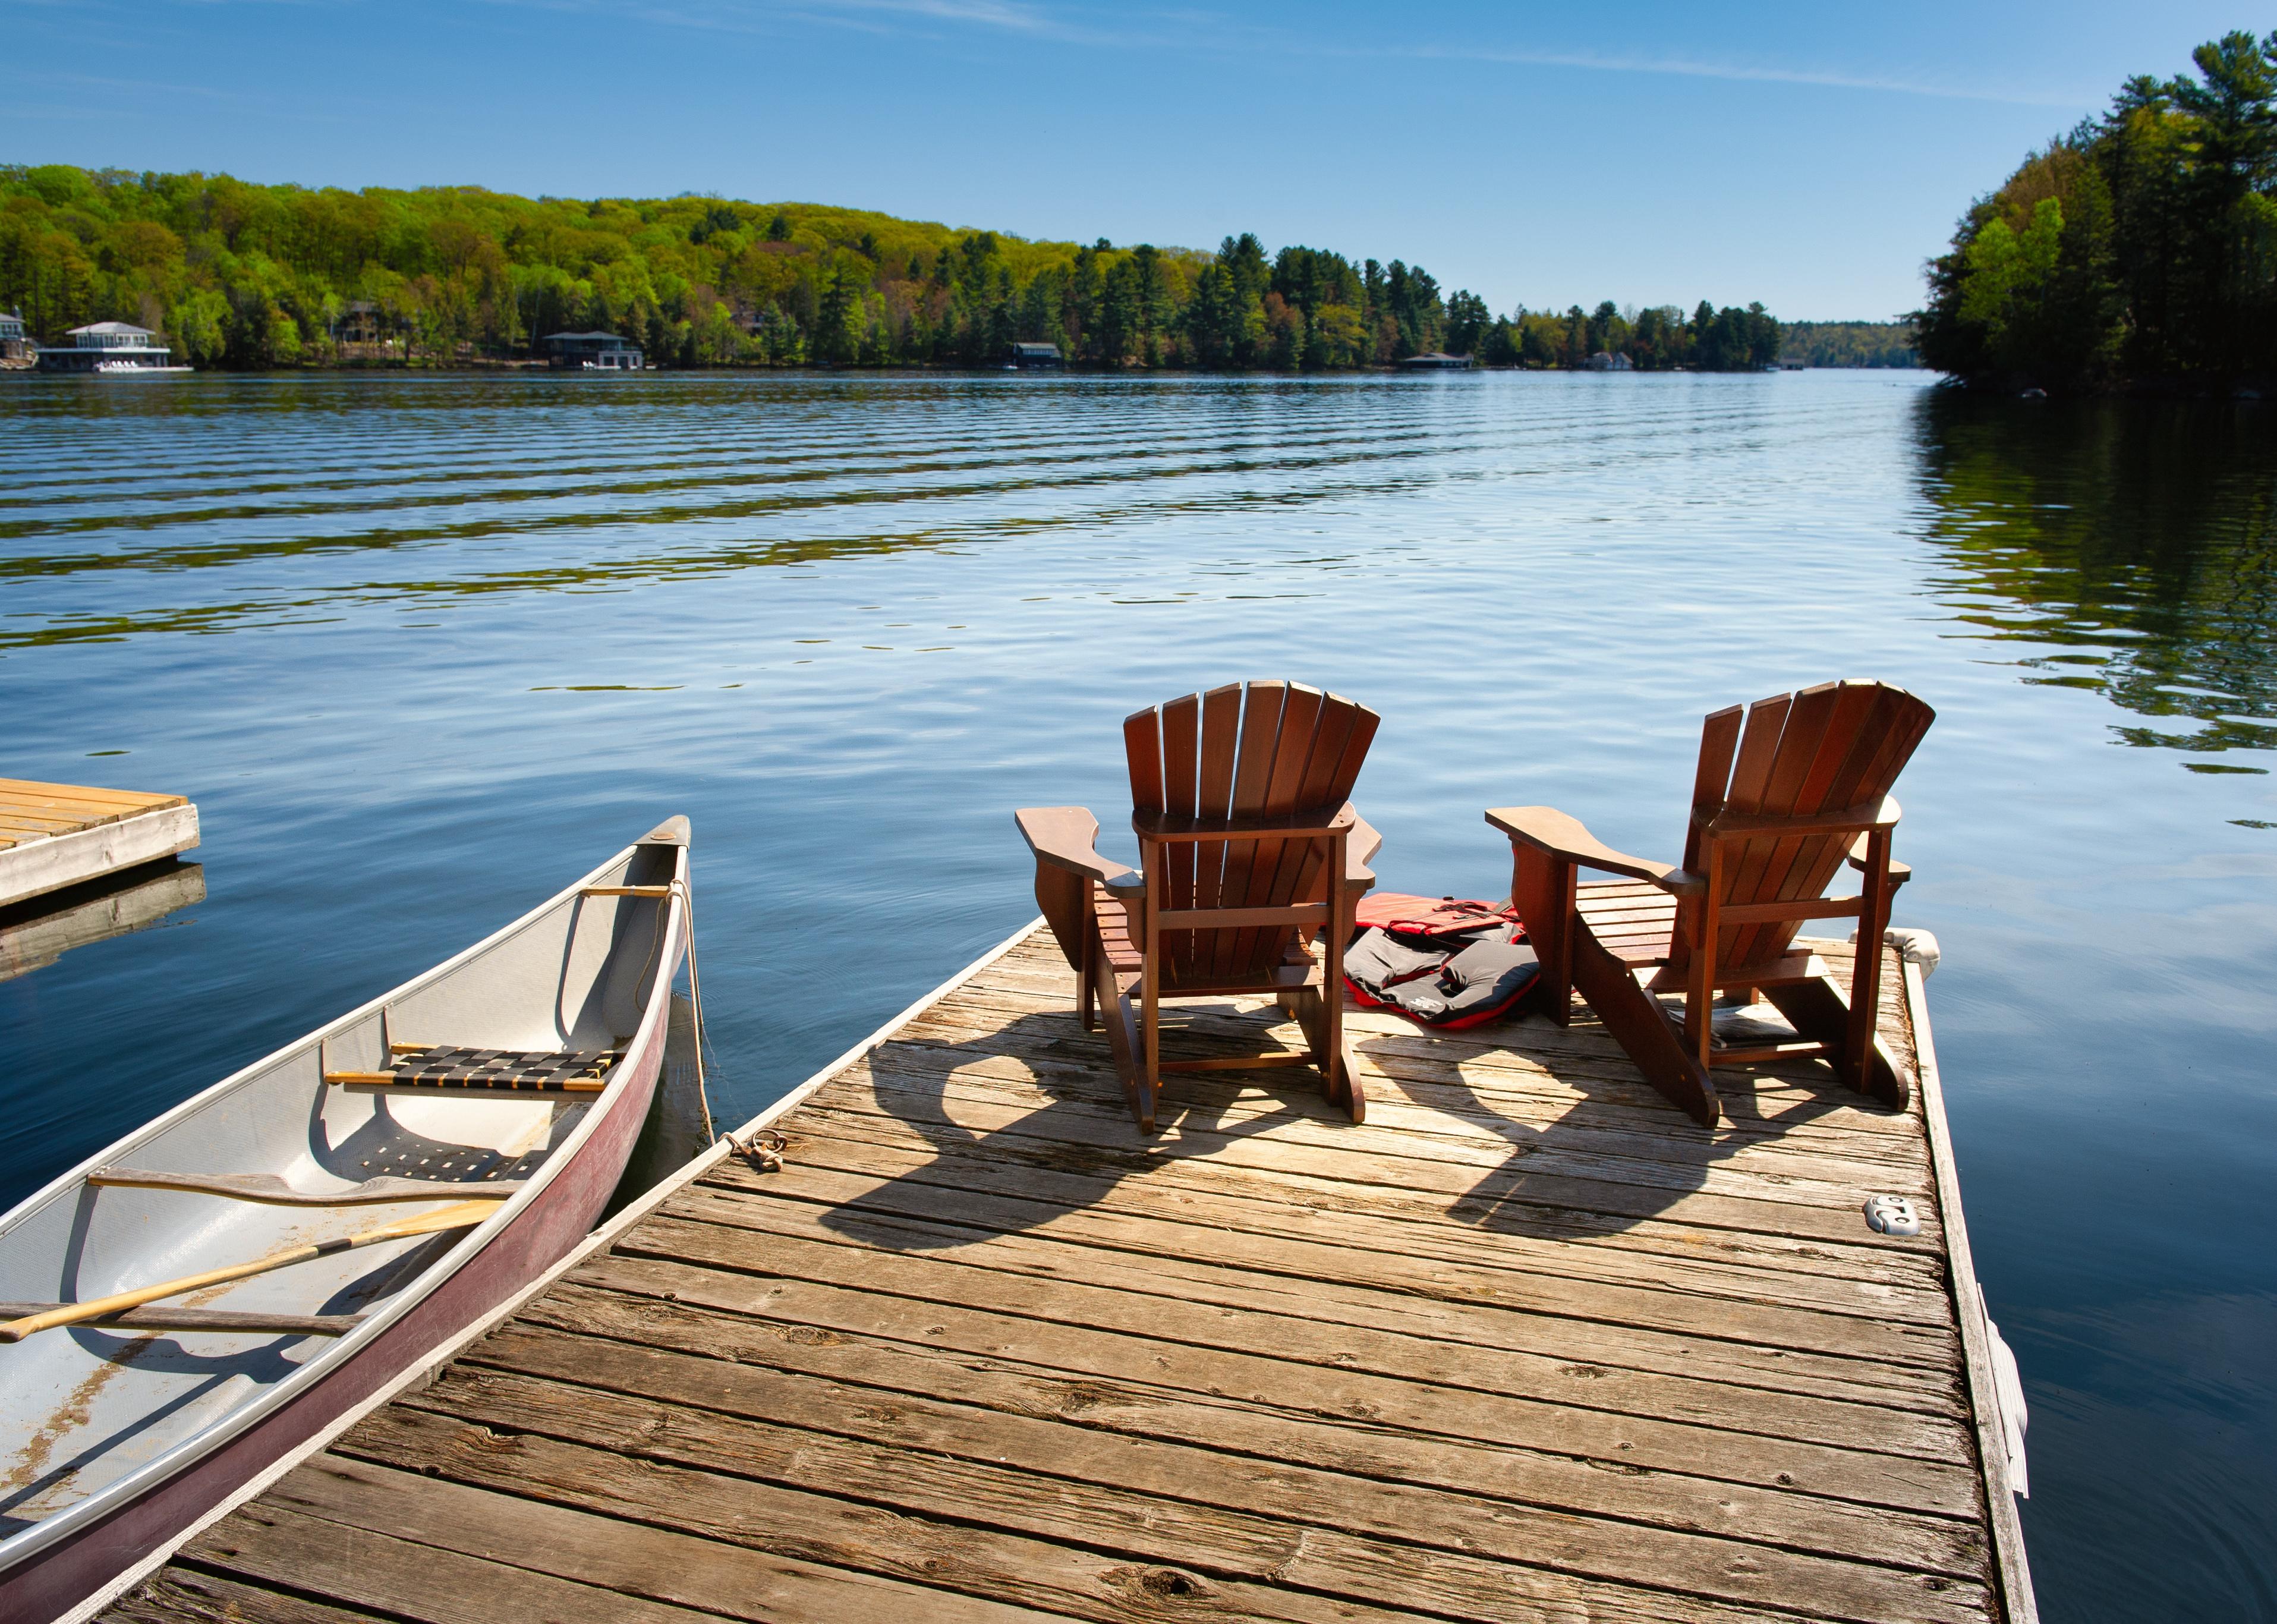 Two Adirondack chairs on a wooden dock facing the blue water.